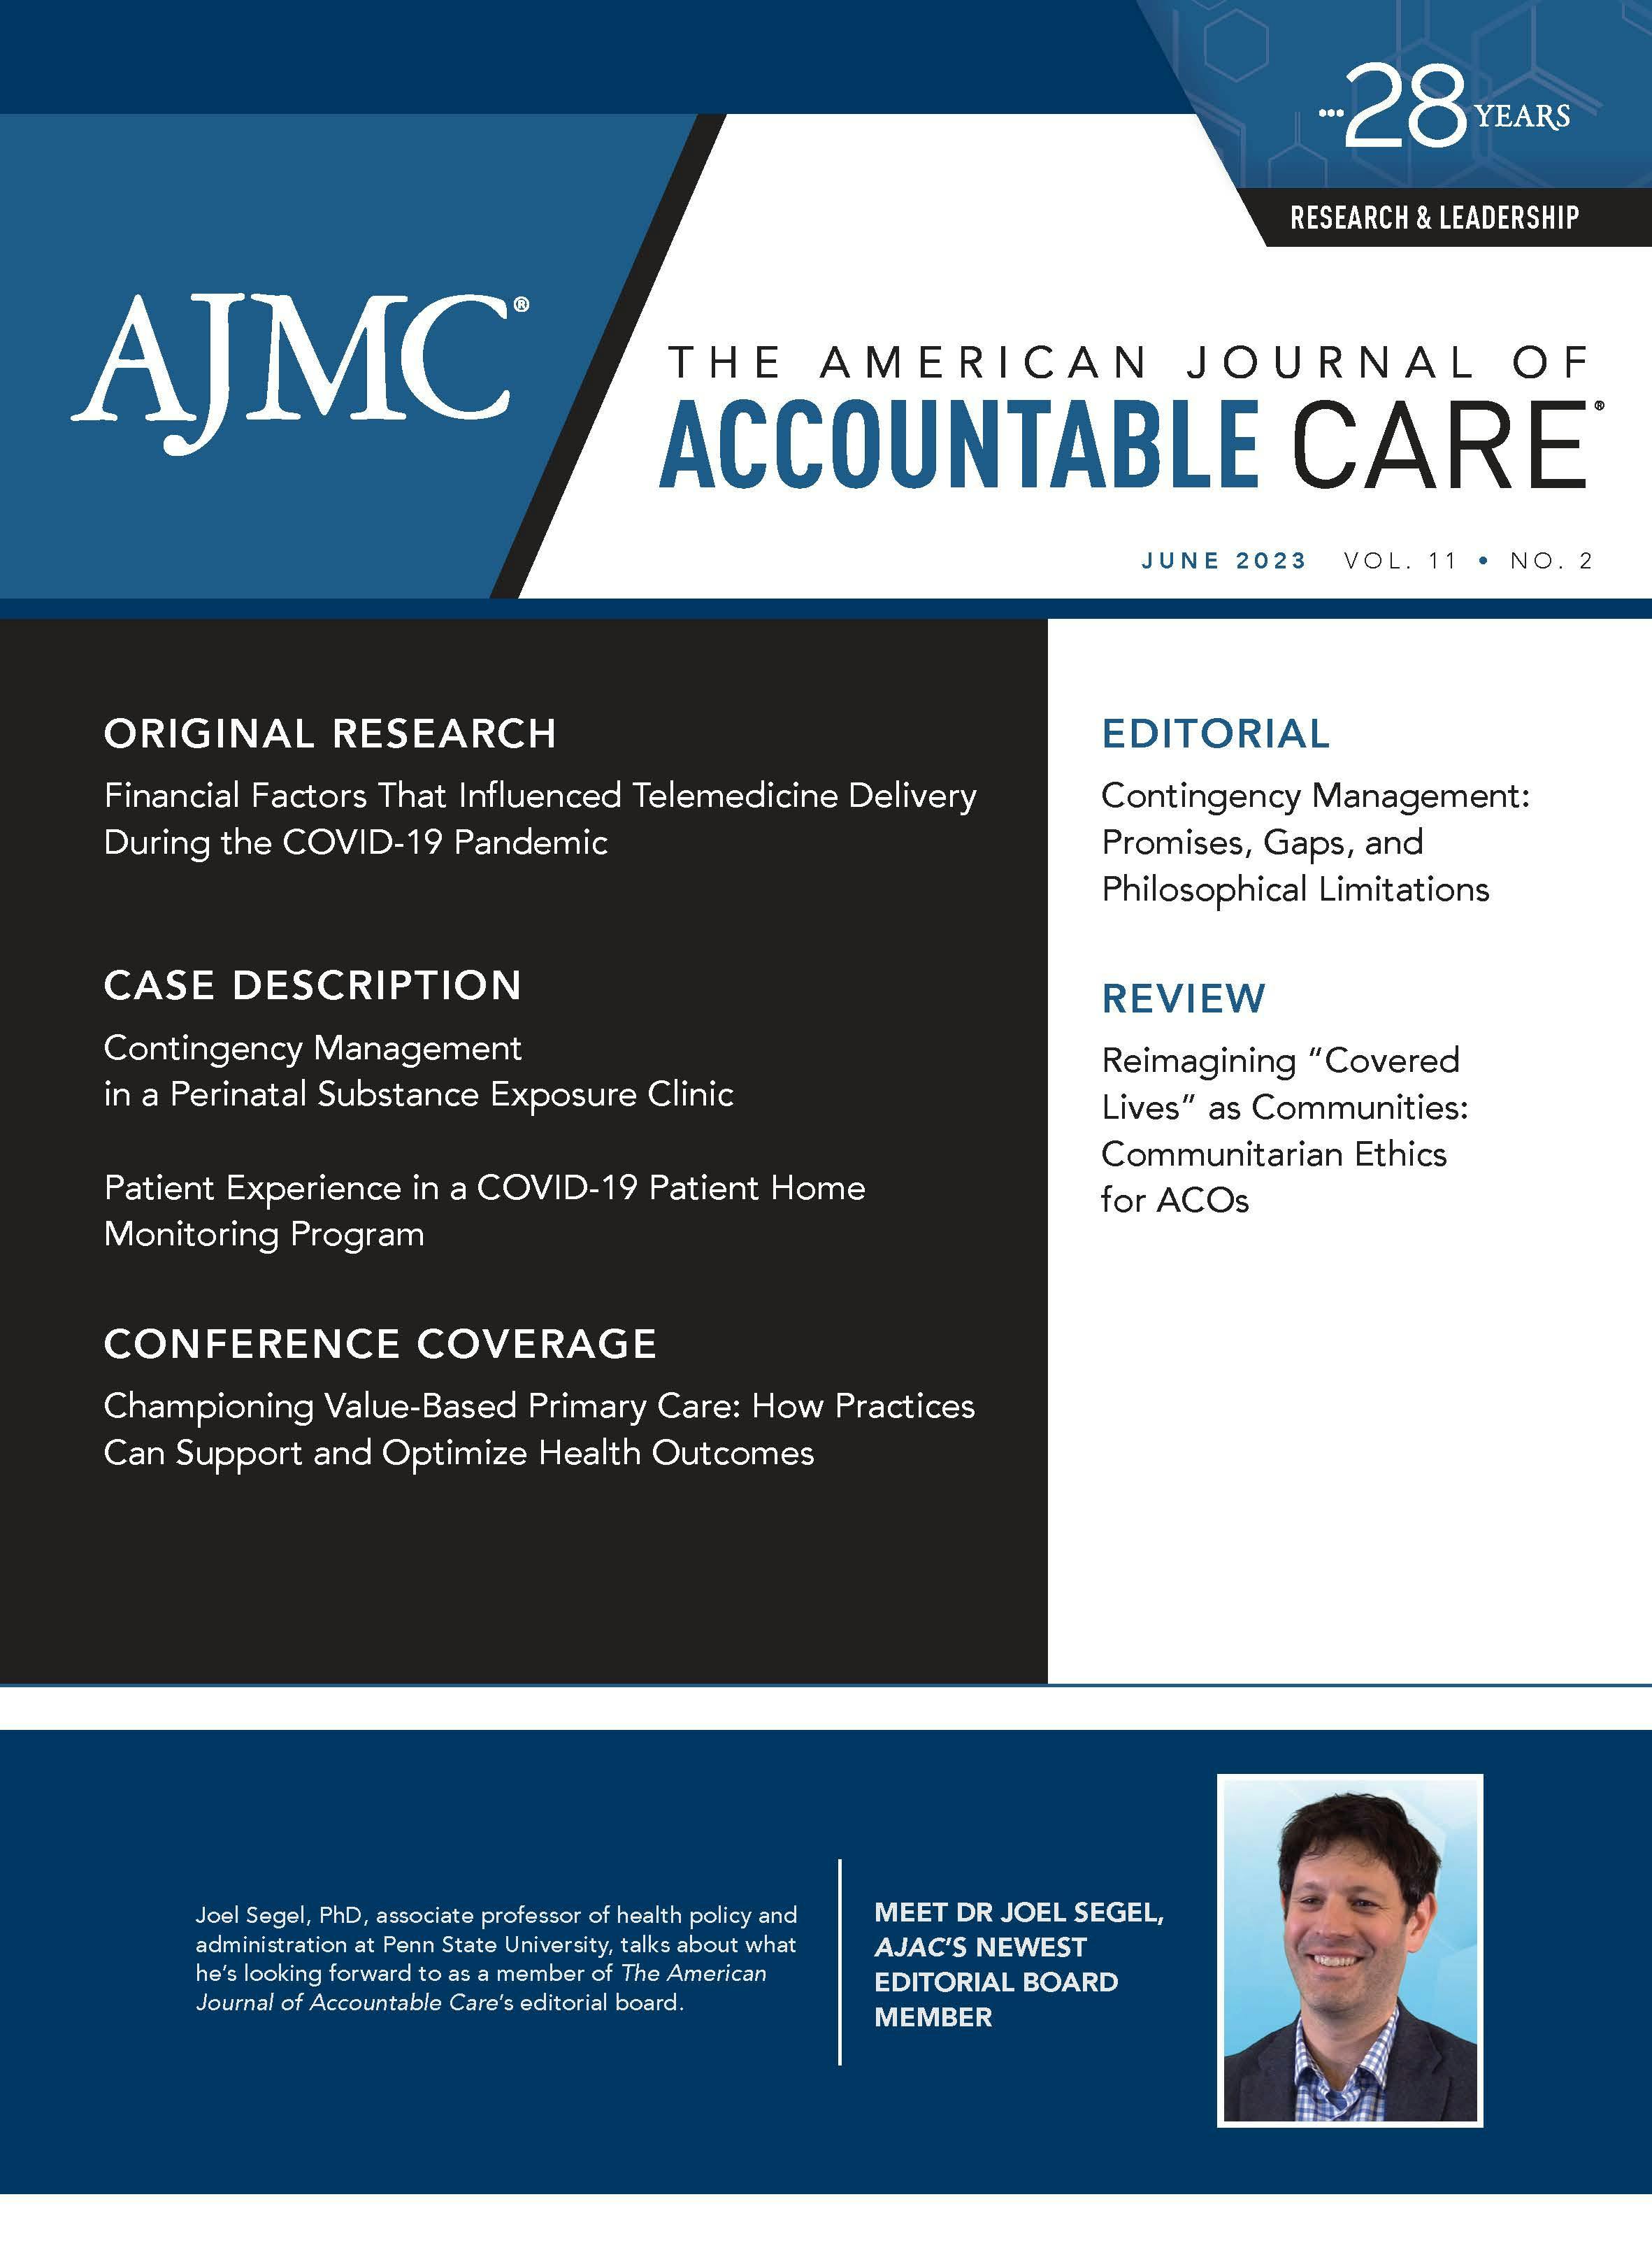 The American Journal of Accountable Care® - June 2023